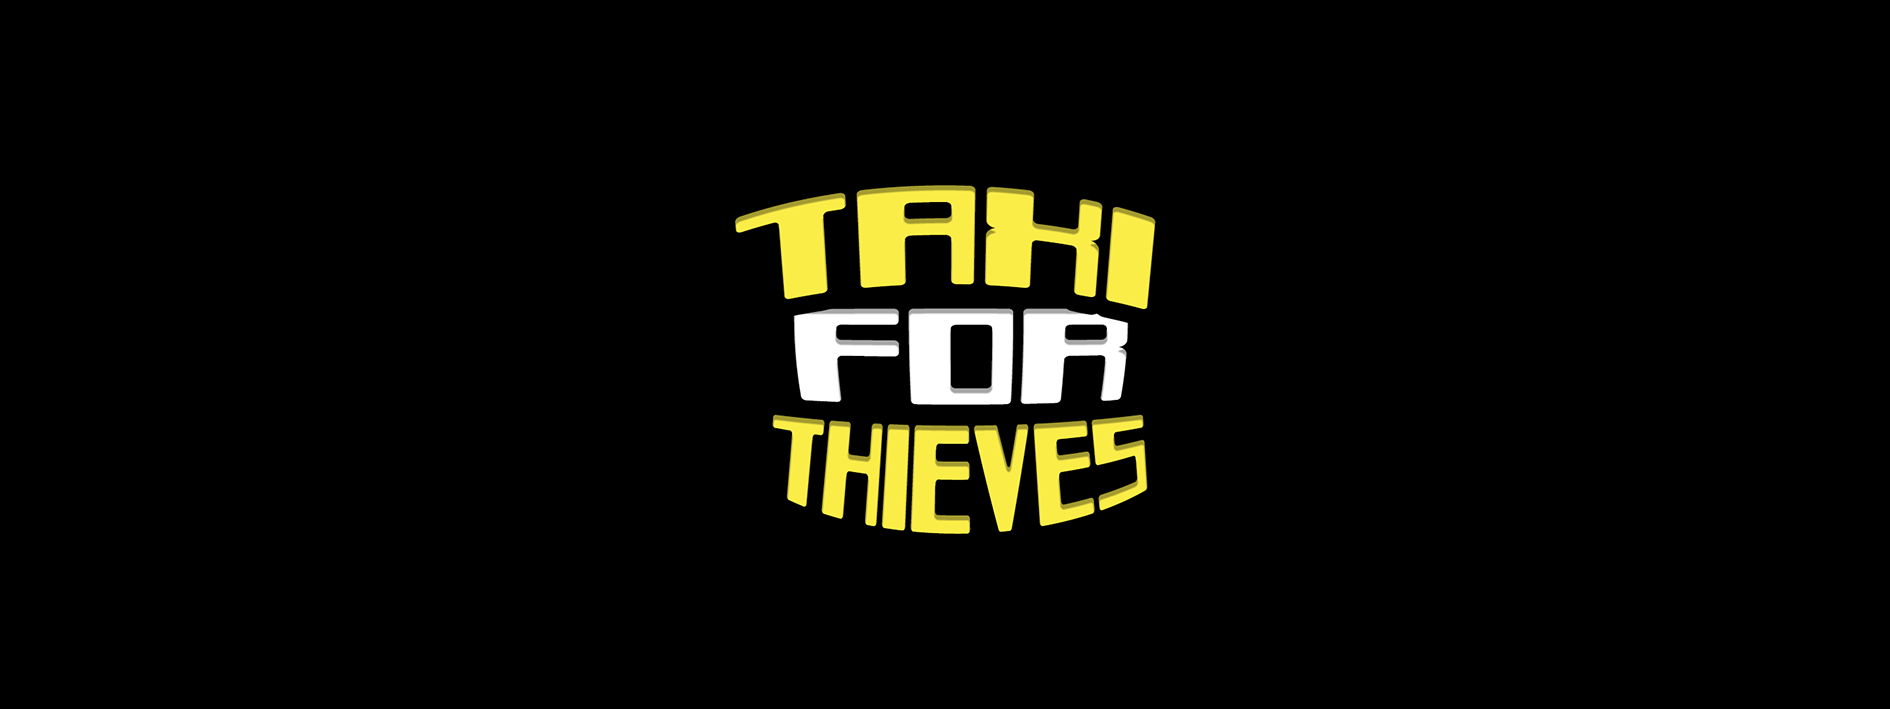 Taxi for Thieves!